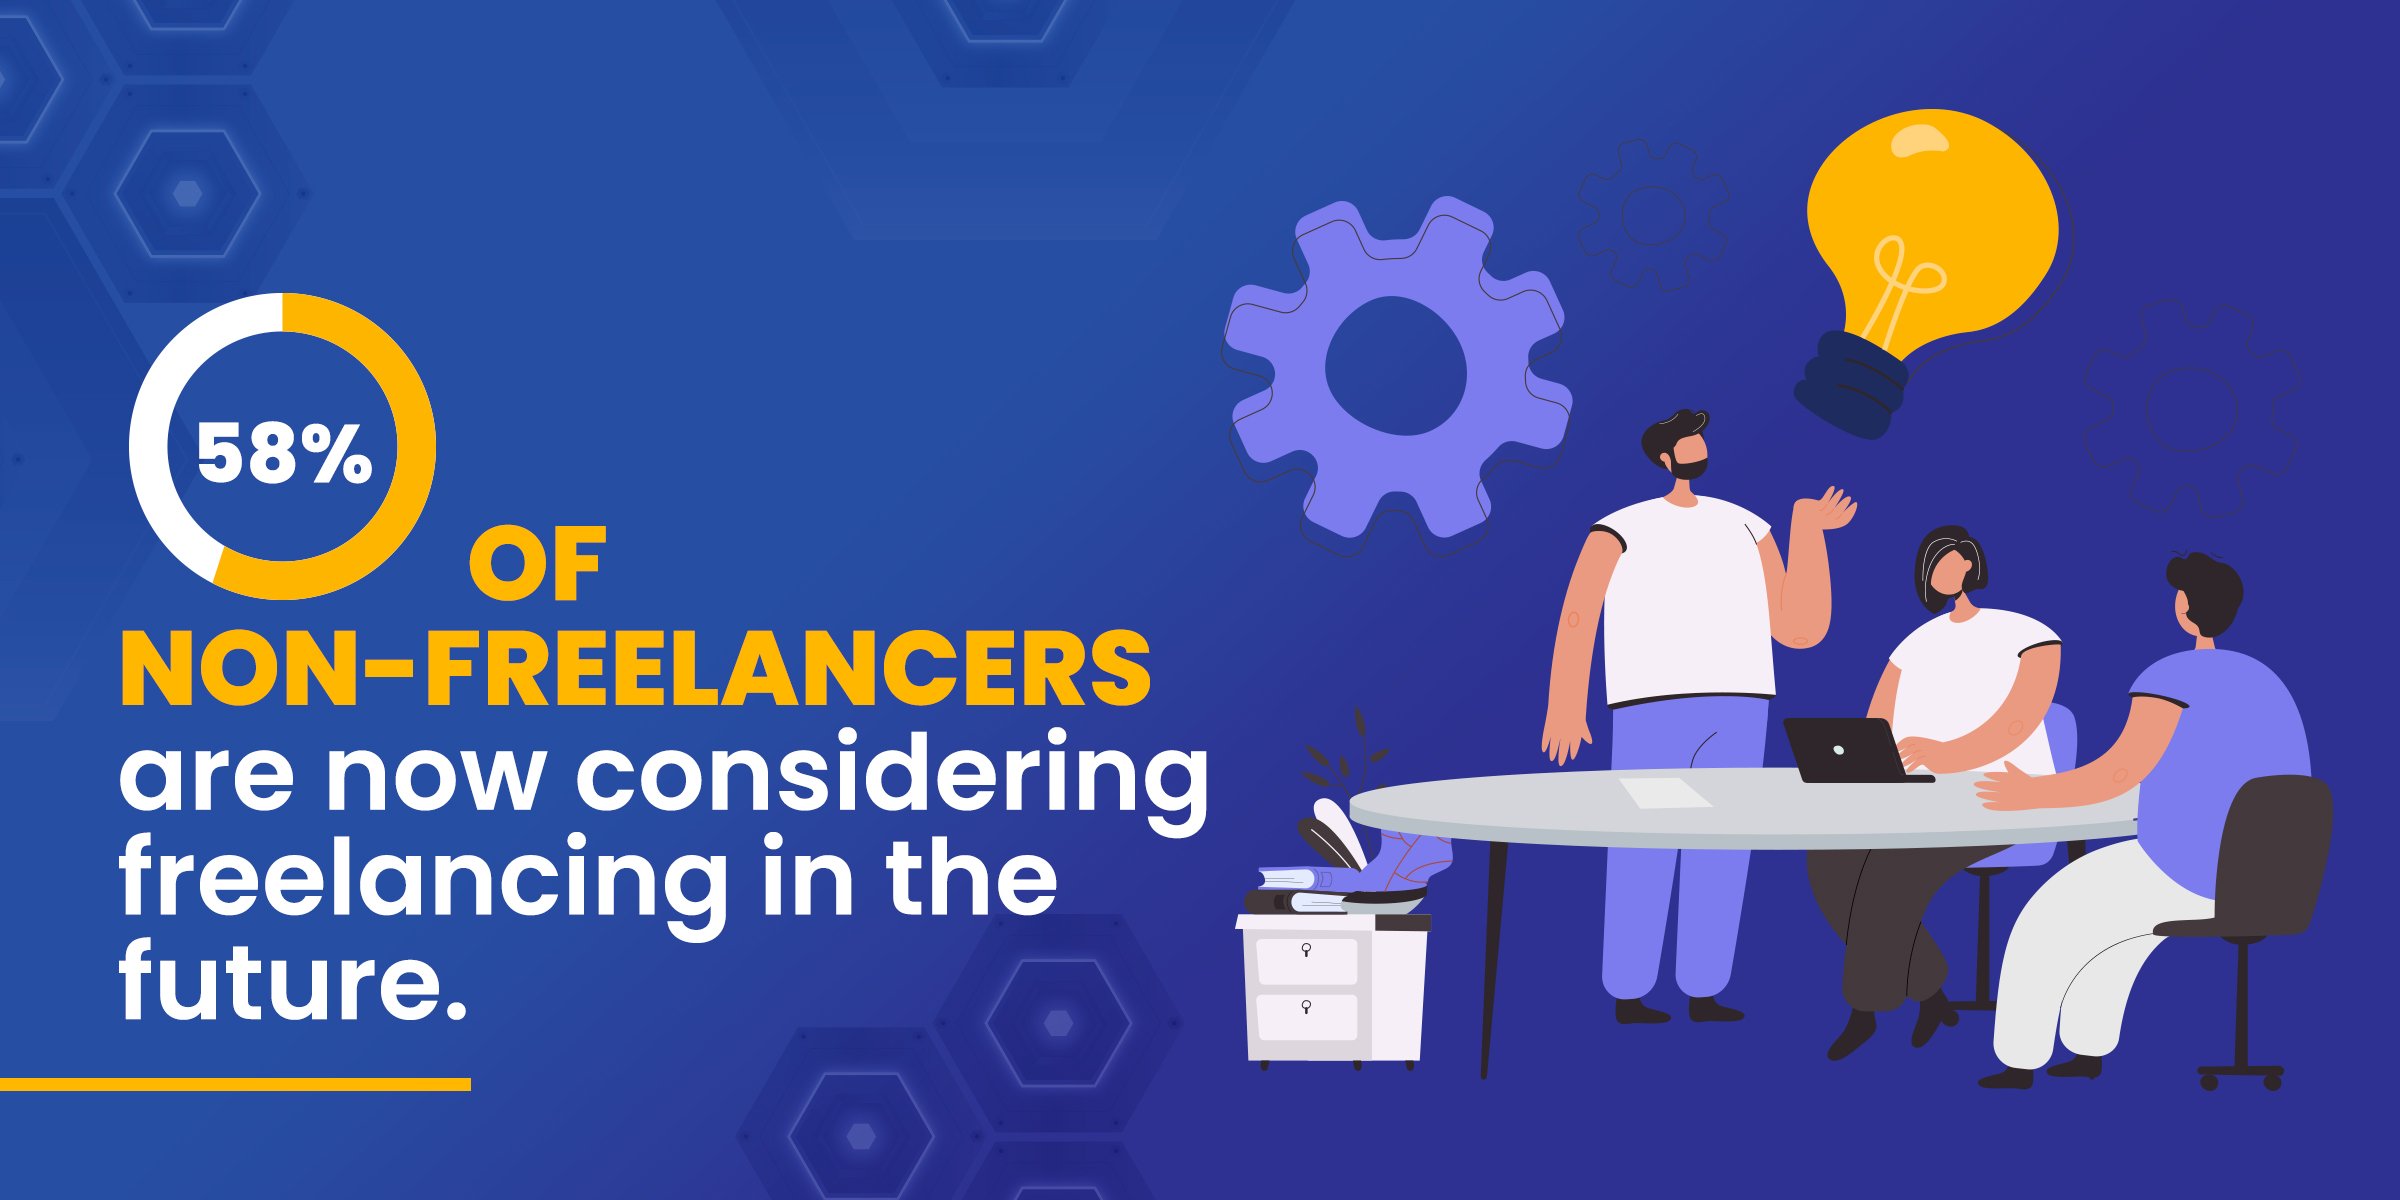 Freelance Statistics - 58% of non-freelancers are now considering freelancing in the future